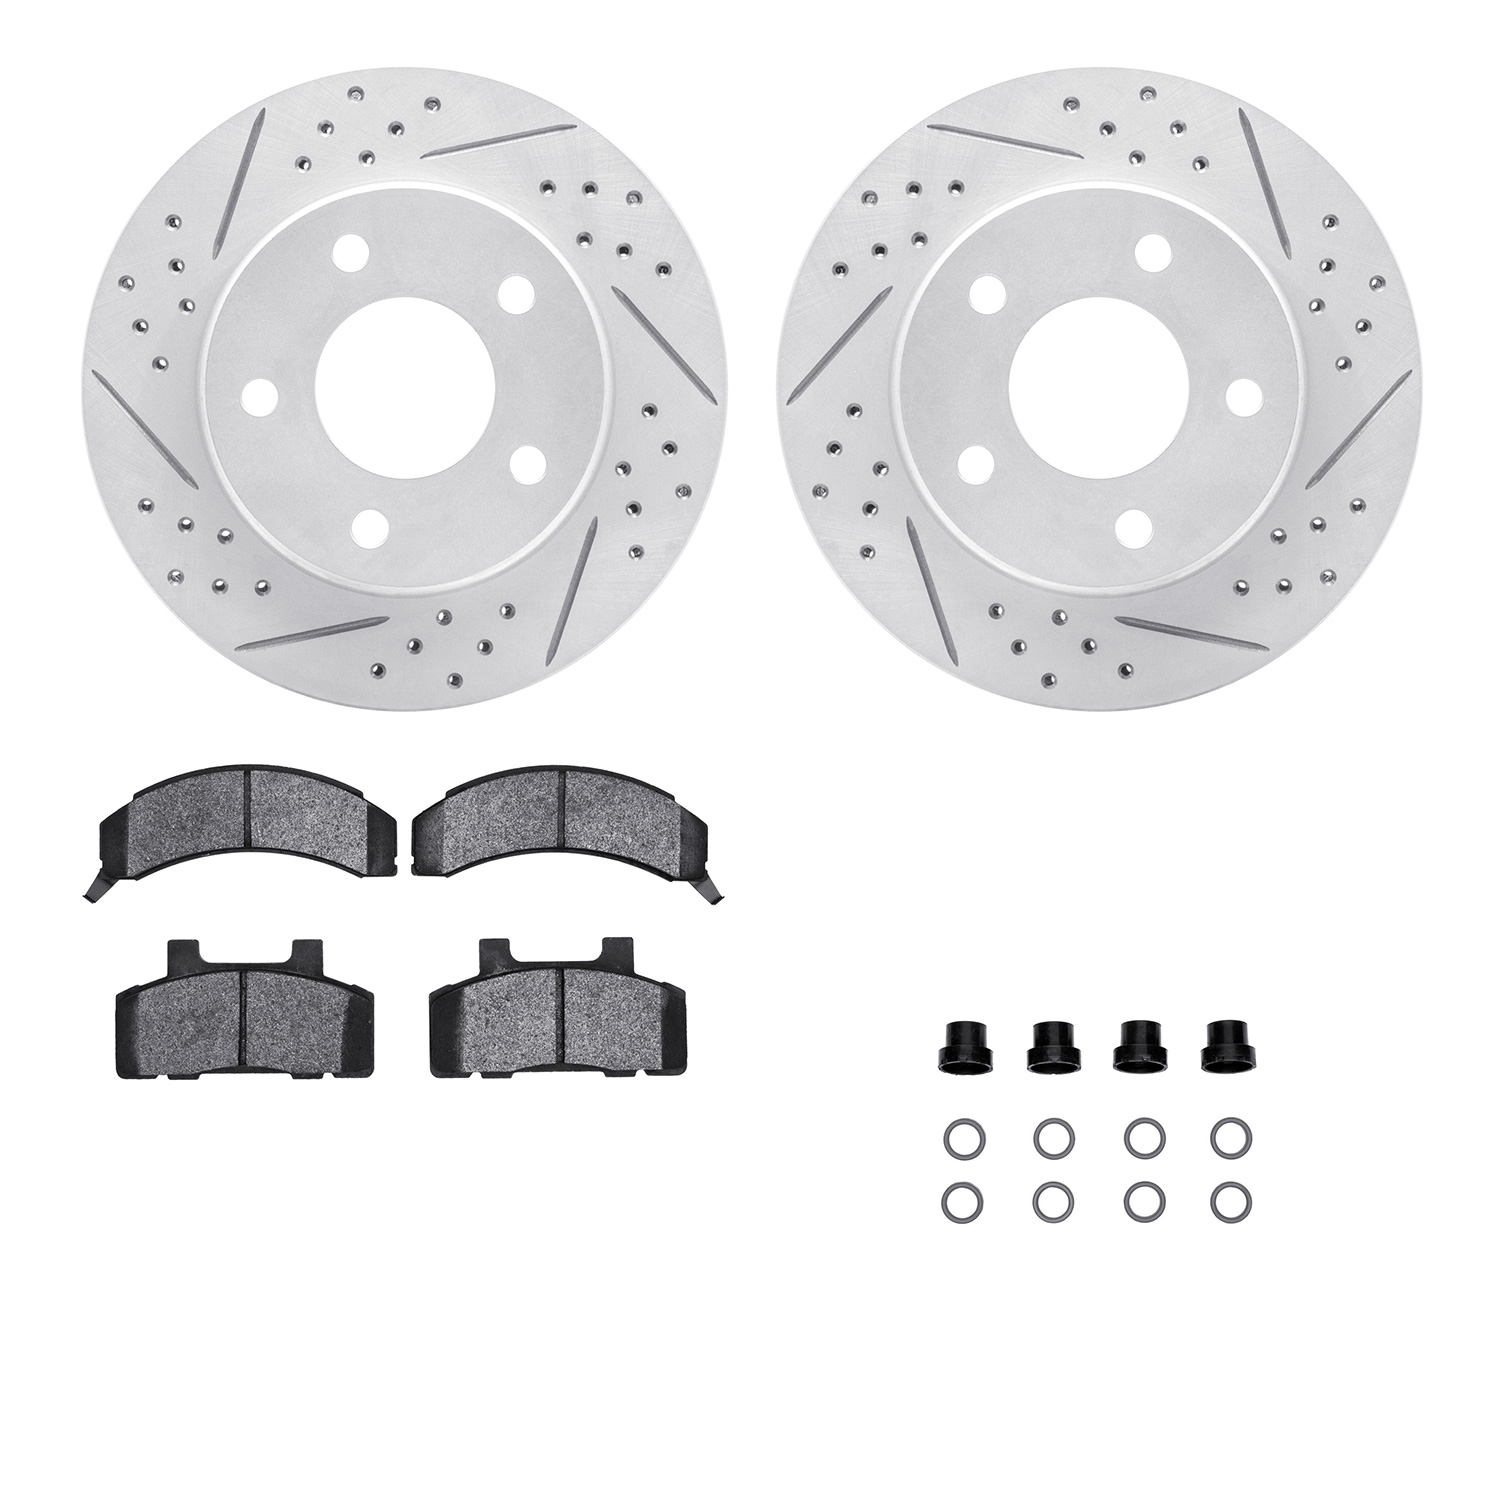 2512-45000 Geoperformance Drilled/Slotted Rotors w/5000 Advanced Brake Pads Kit & Hardware, 1983-1990 GM, Position: Front